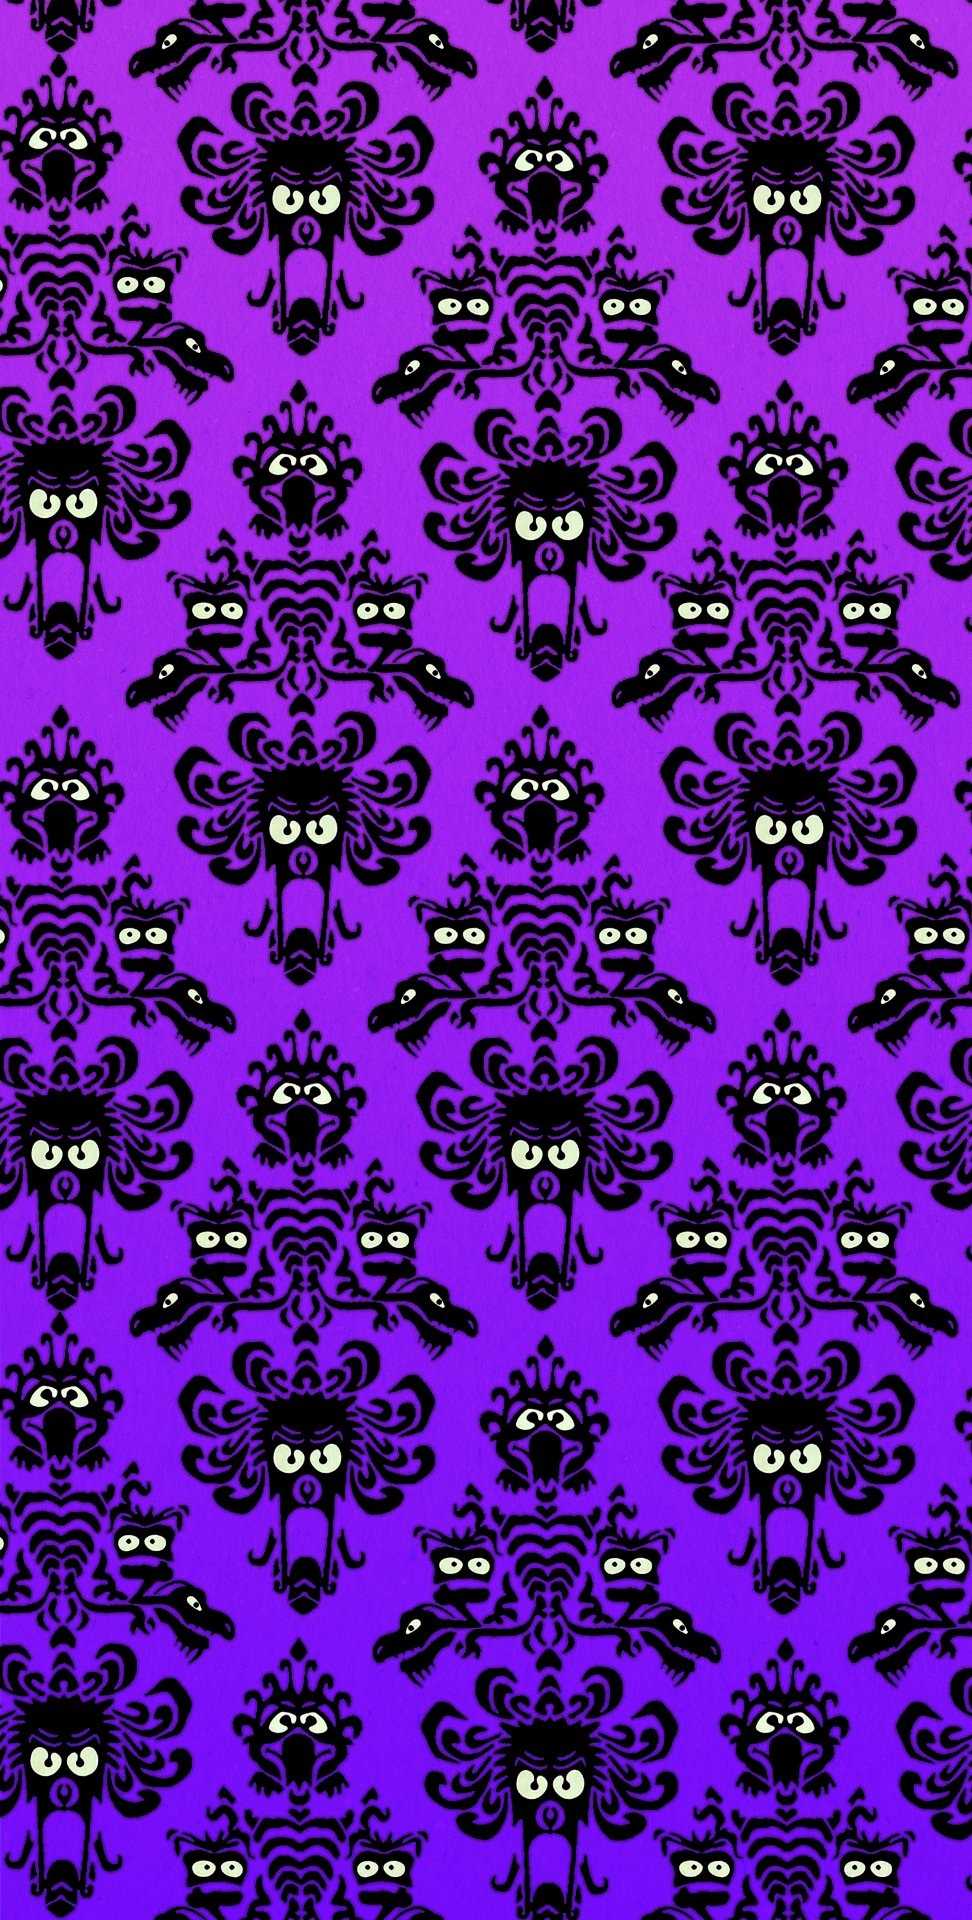 Mobile Haunted Mansion Wallpaper 1